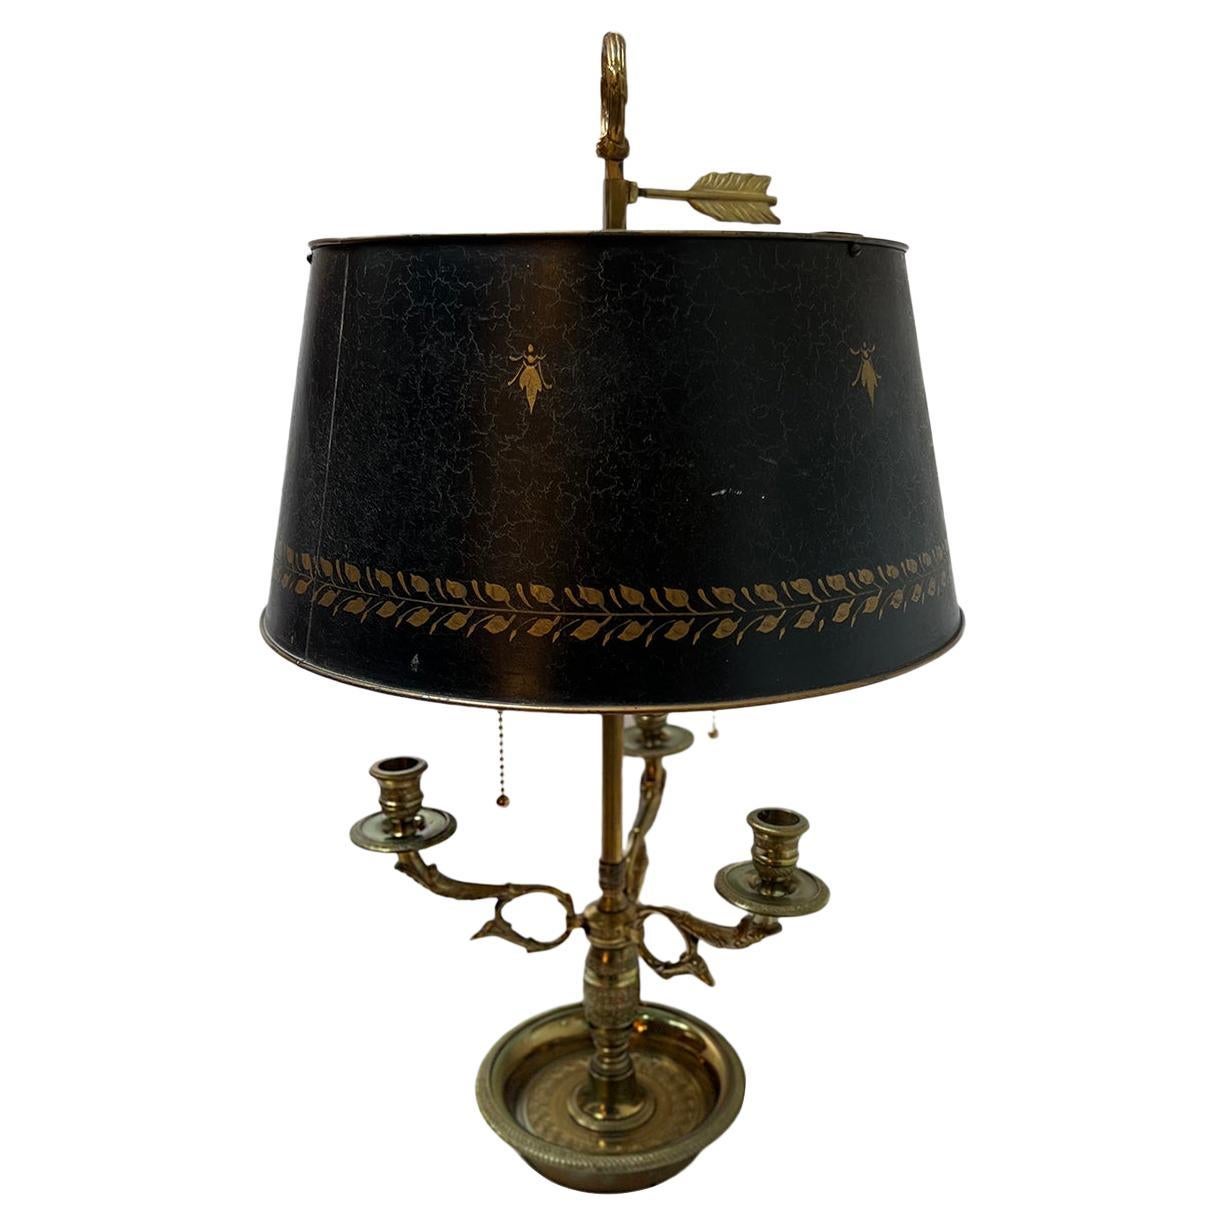 French Boulliote Lamp with Tole Shade